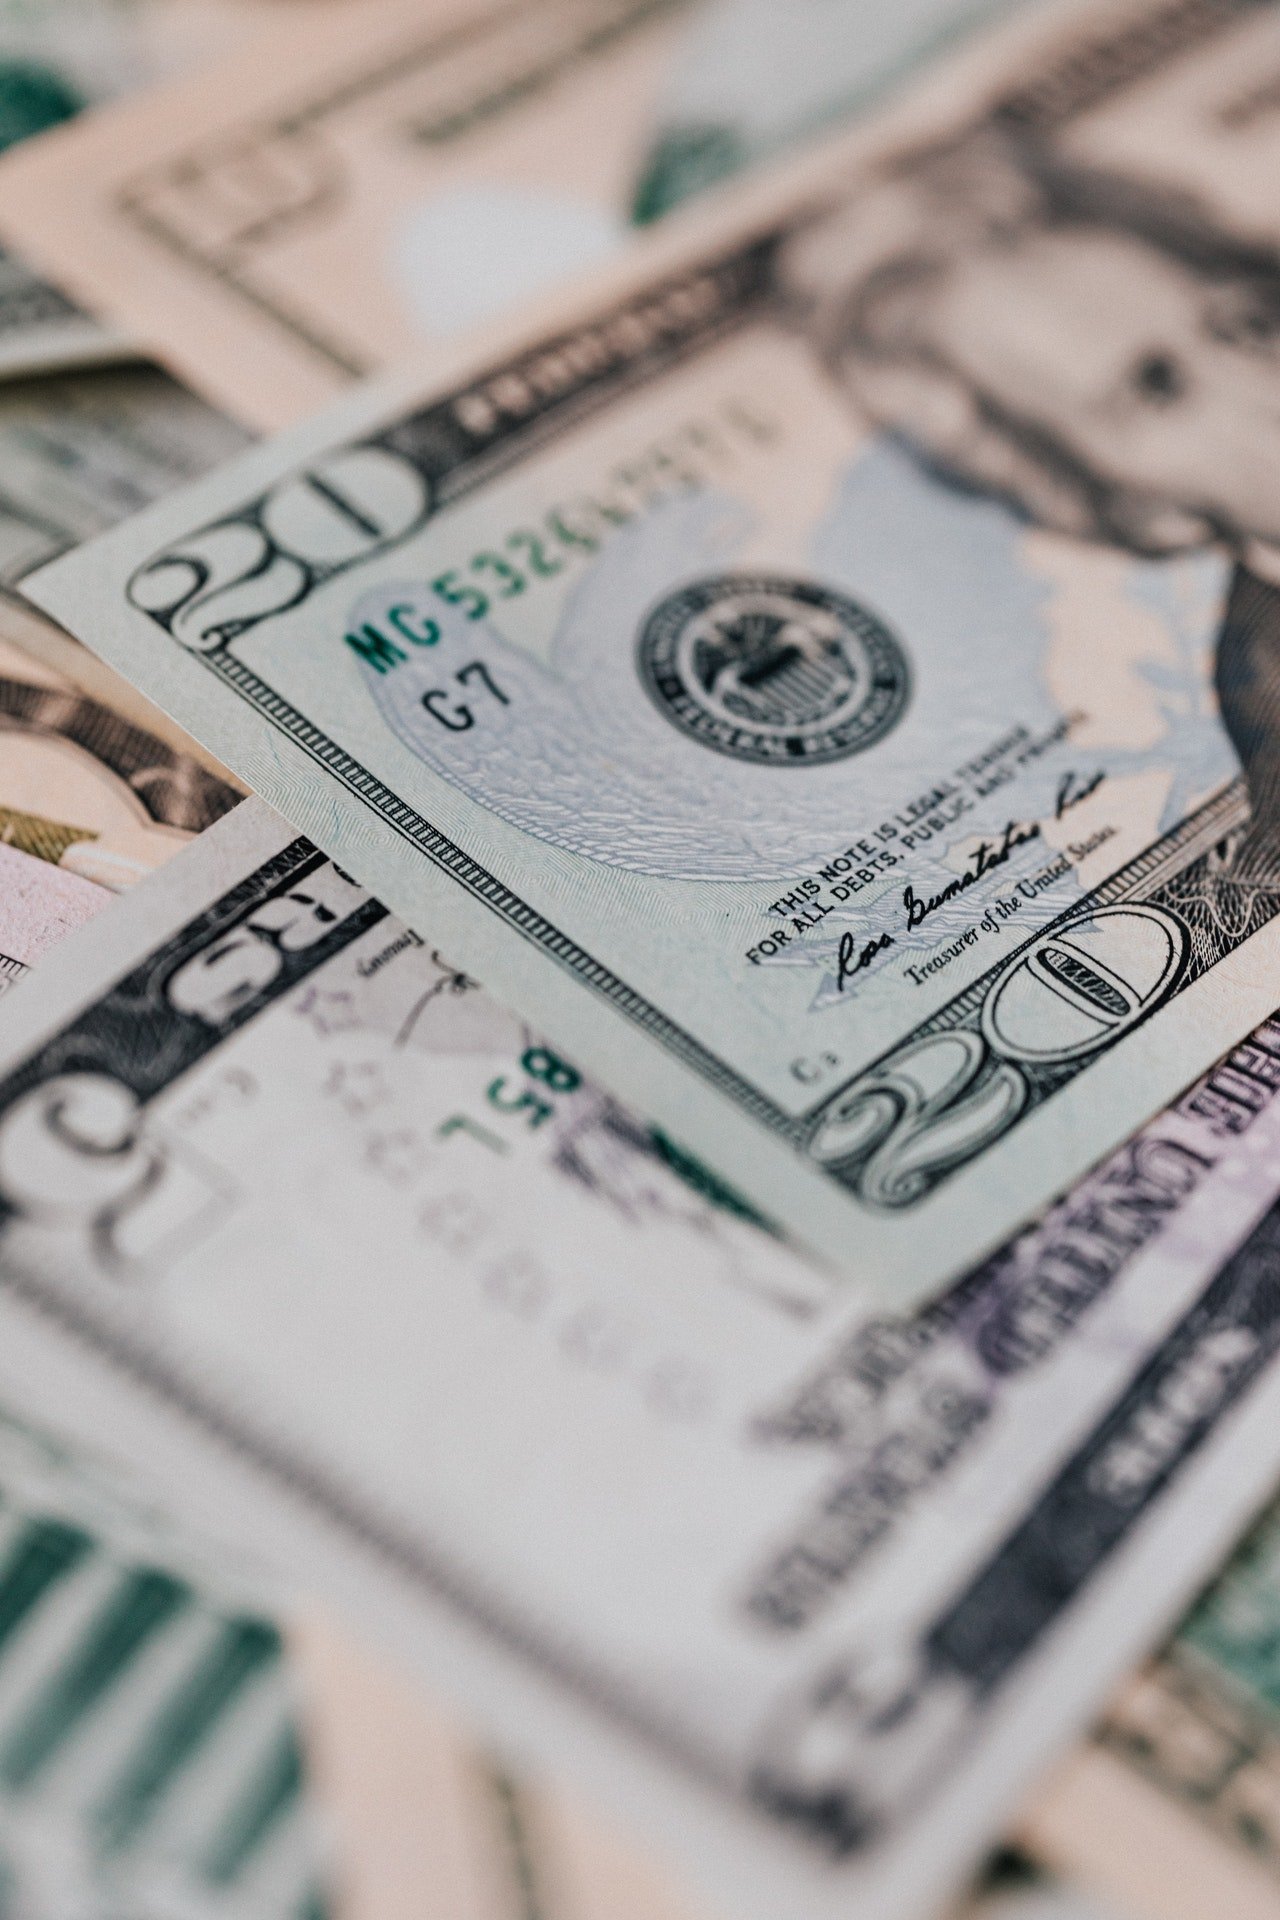 There were stacks of money inside the walls. | Source: Pexels